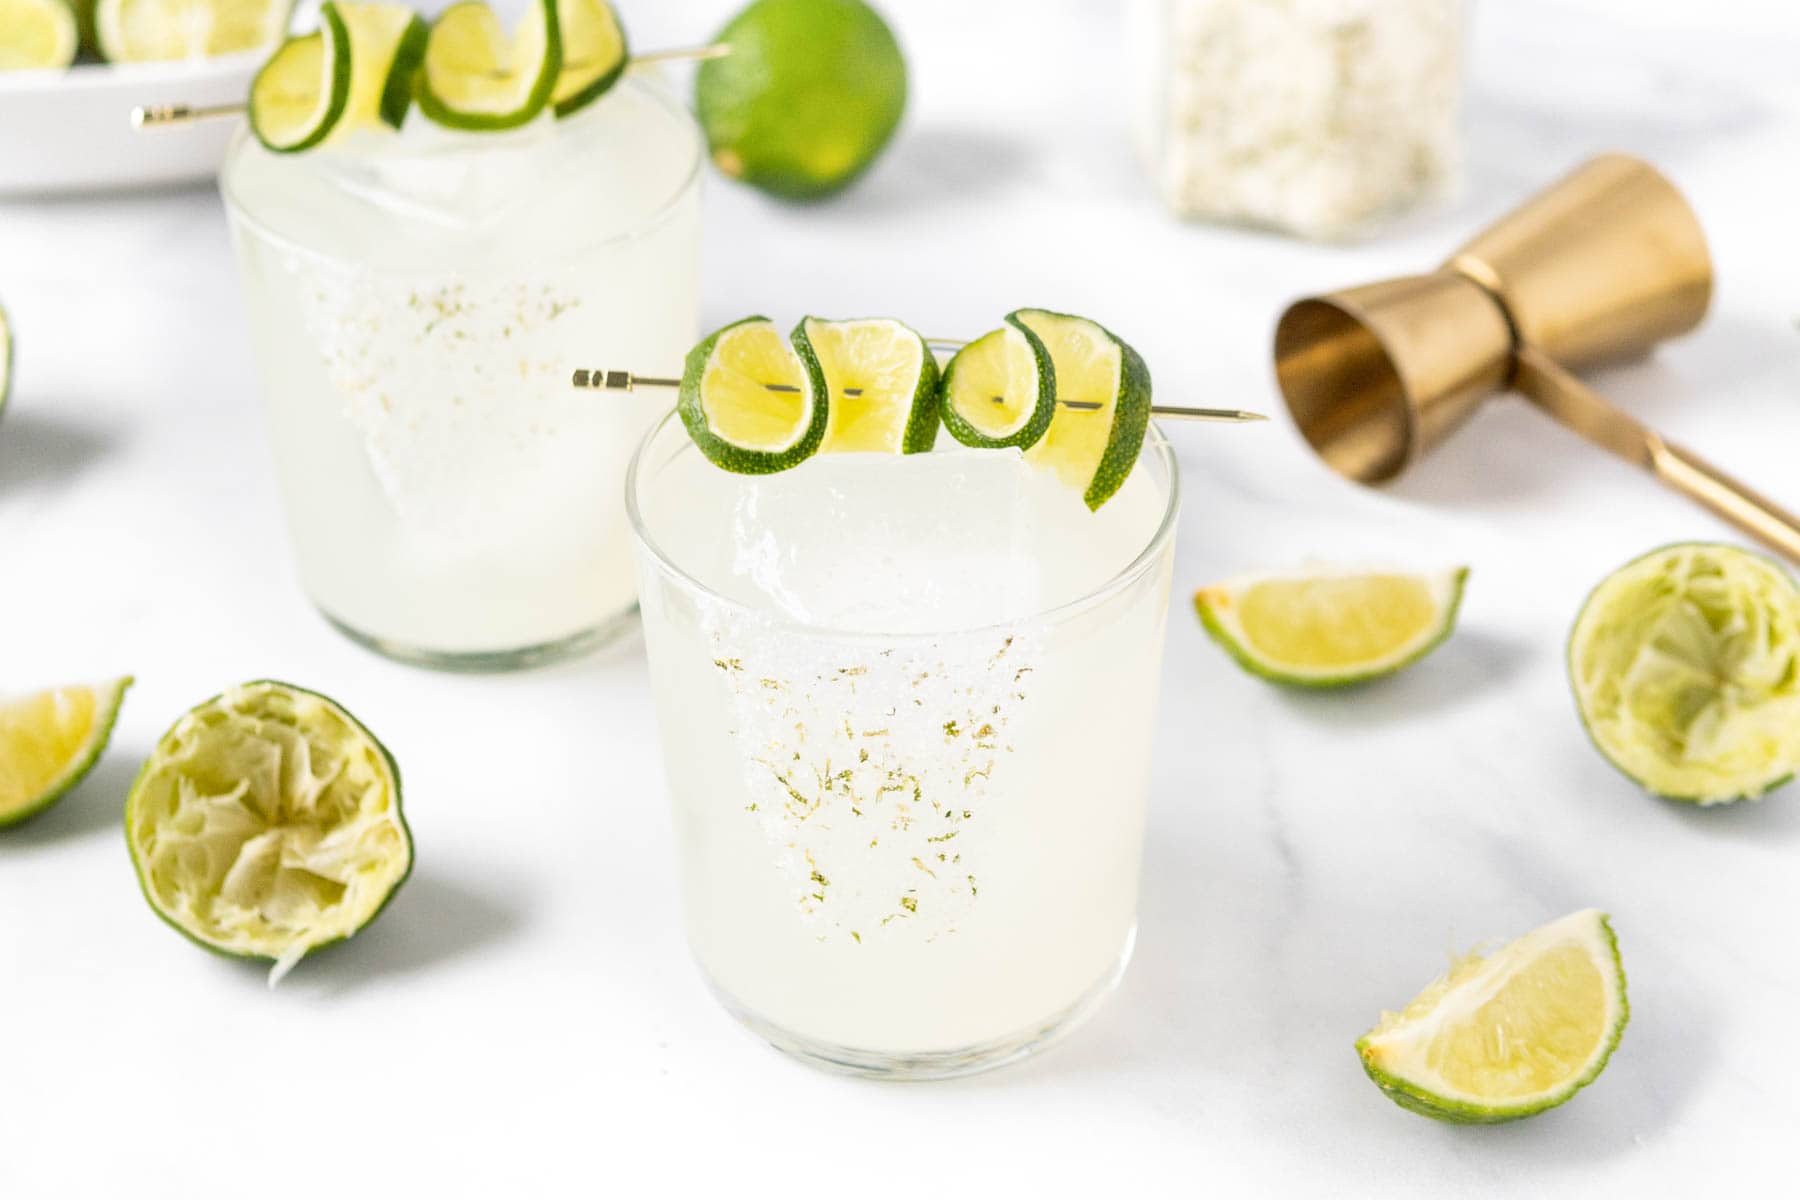 Two margarita glasses with limes and garnishes.